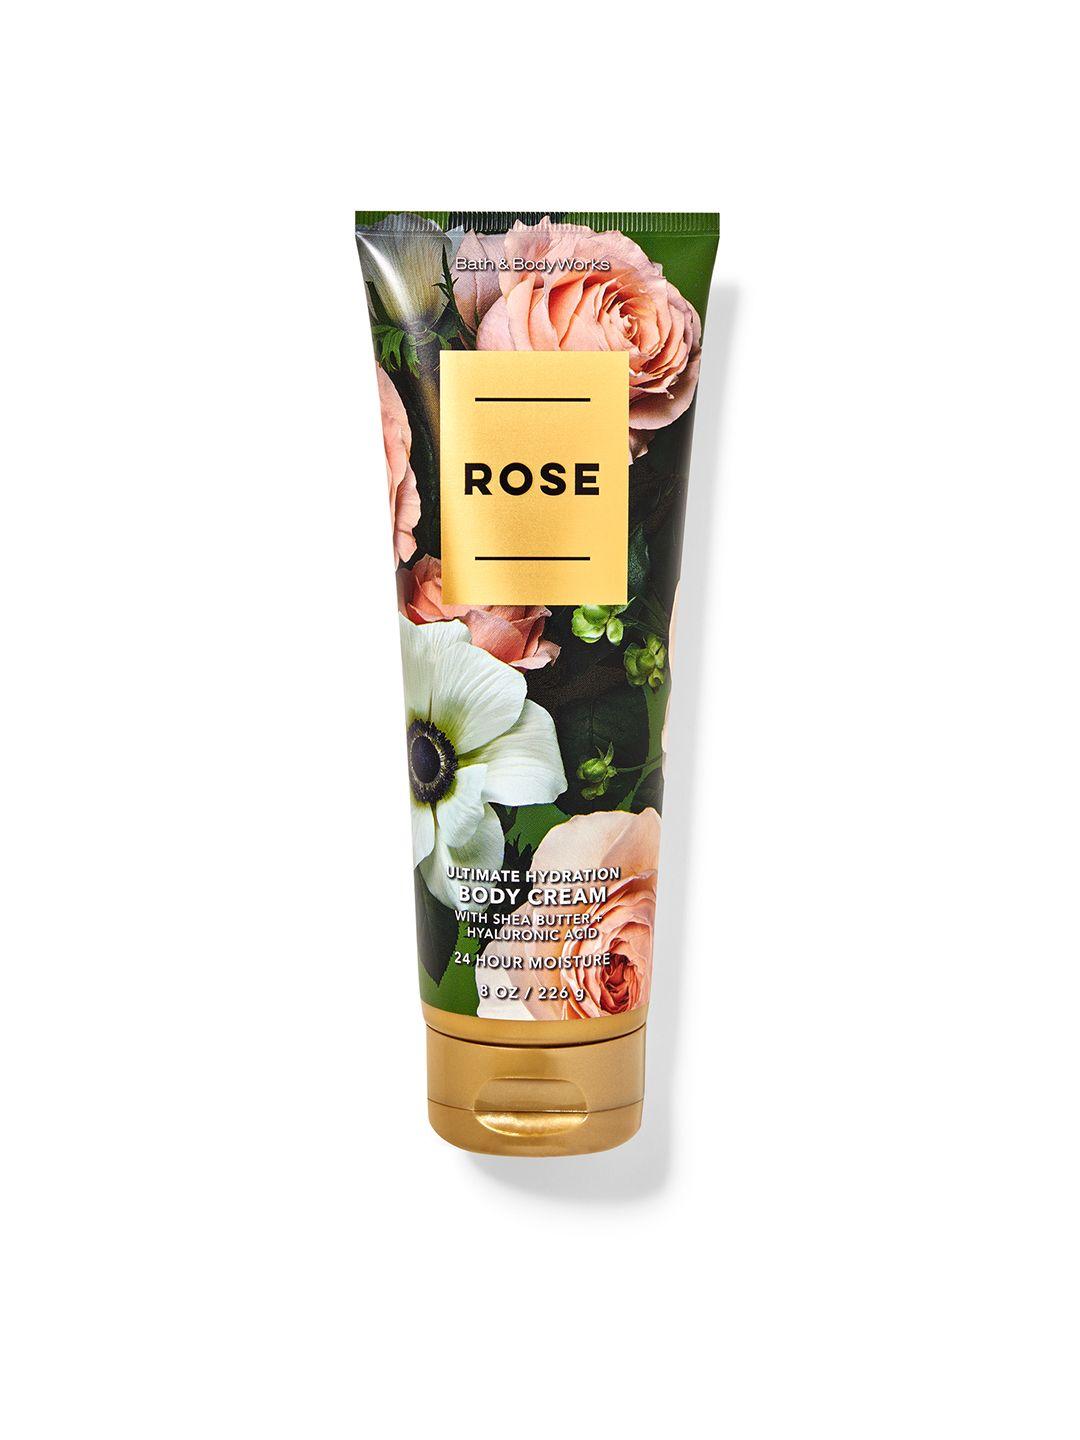 bath & body works rose ultimate hydration body cream with hyaluronic acid - 226 g